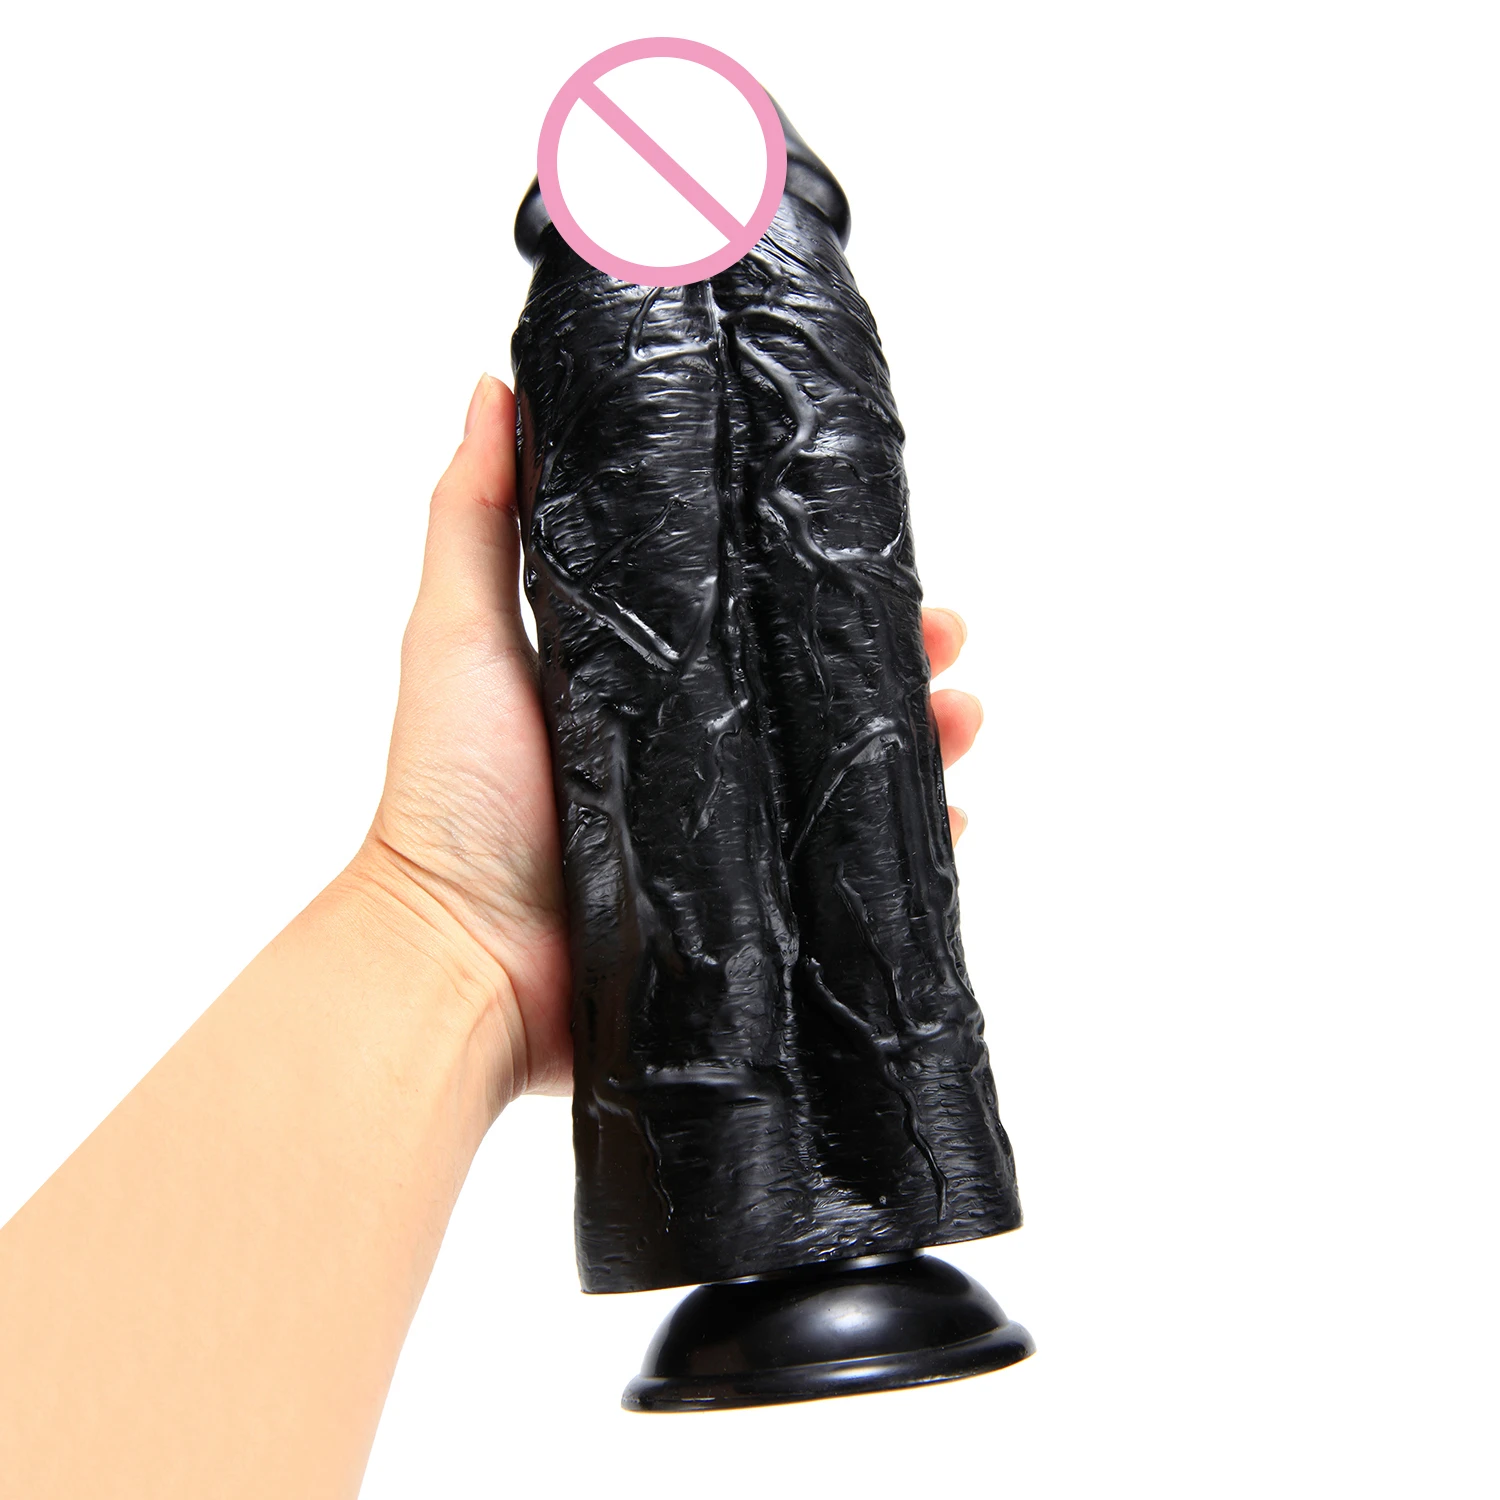 Erotic Big Soft Double Dildo Realistic Suction Cup Large Penis Lesbian 12.4inch Huge Two Dildos For Women Gay Intimacy Sex Toys Suppliers Sa20d2501a45e42878177142f1dd58aa3N